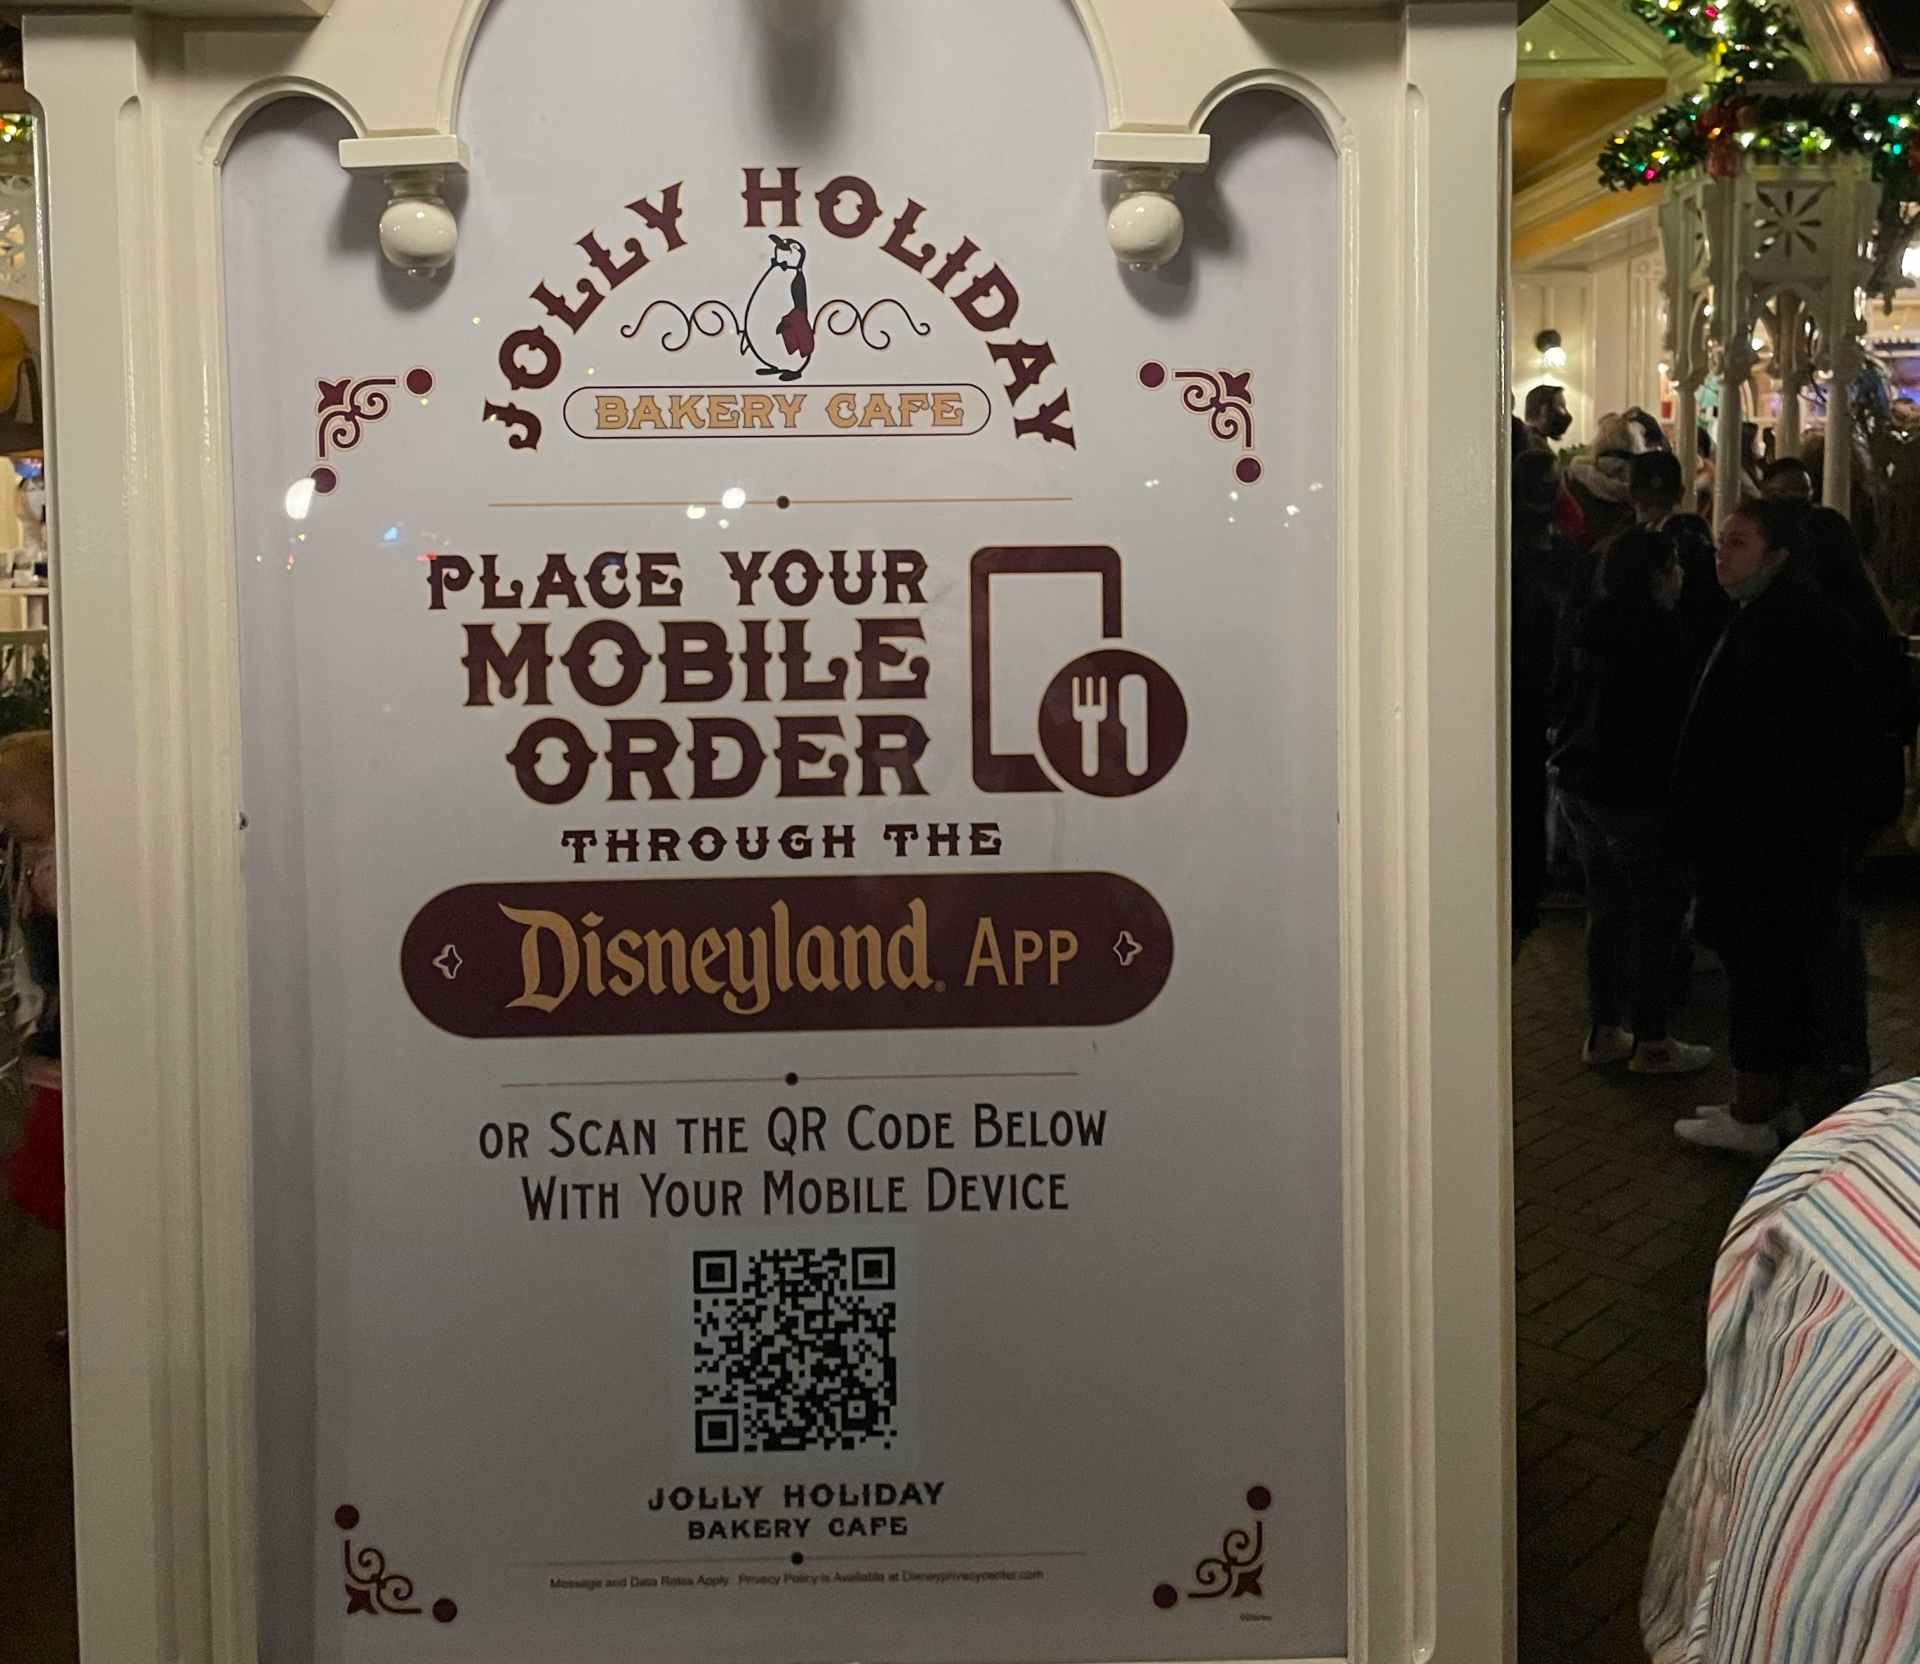 Disneyland restaurant sign with mobile ordering instructions